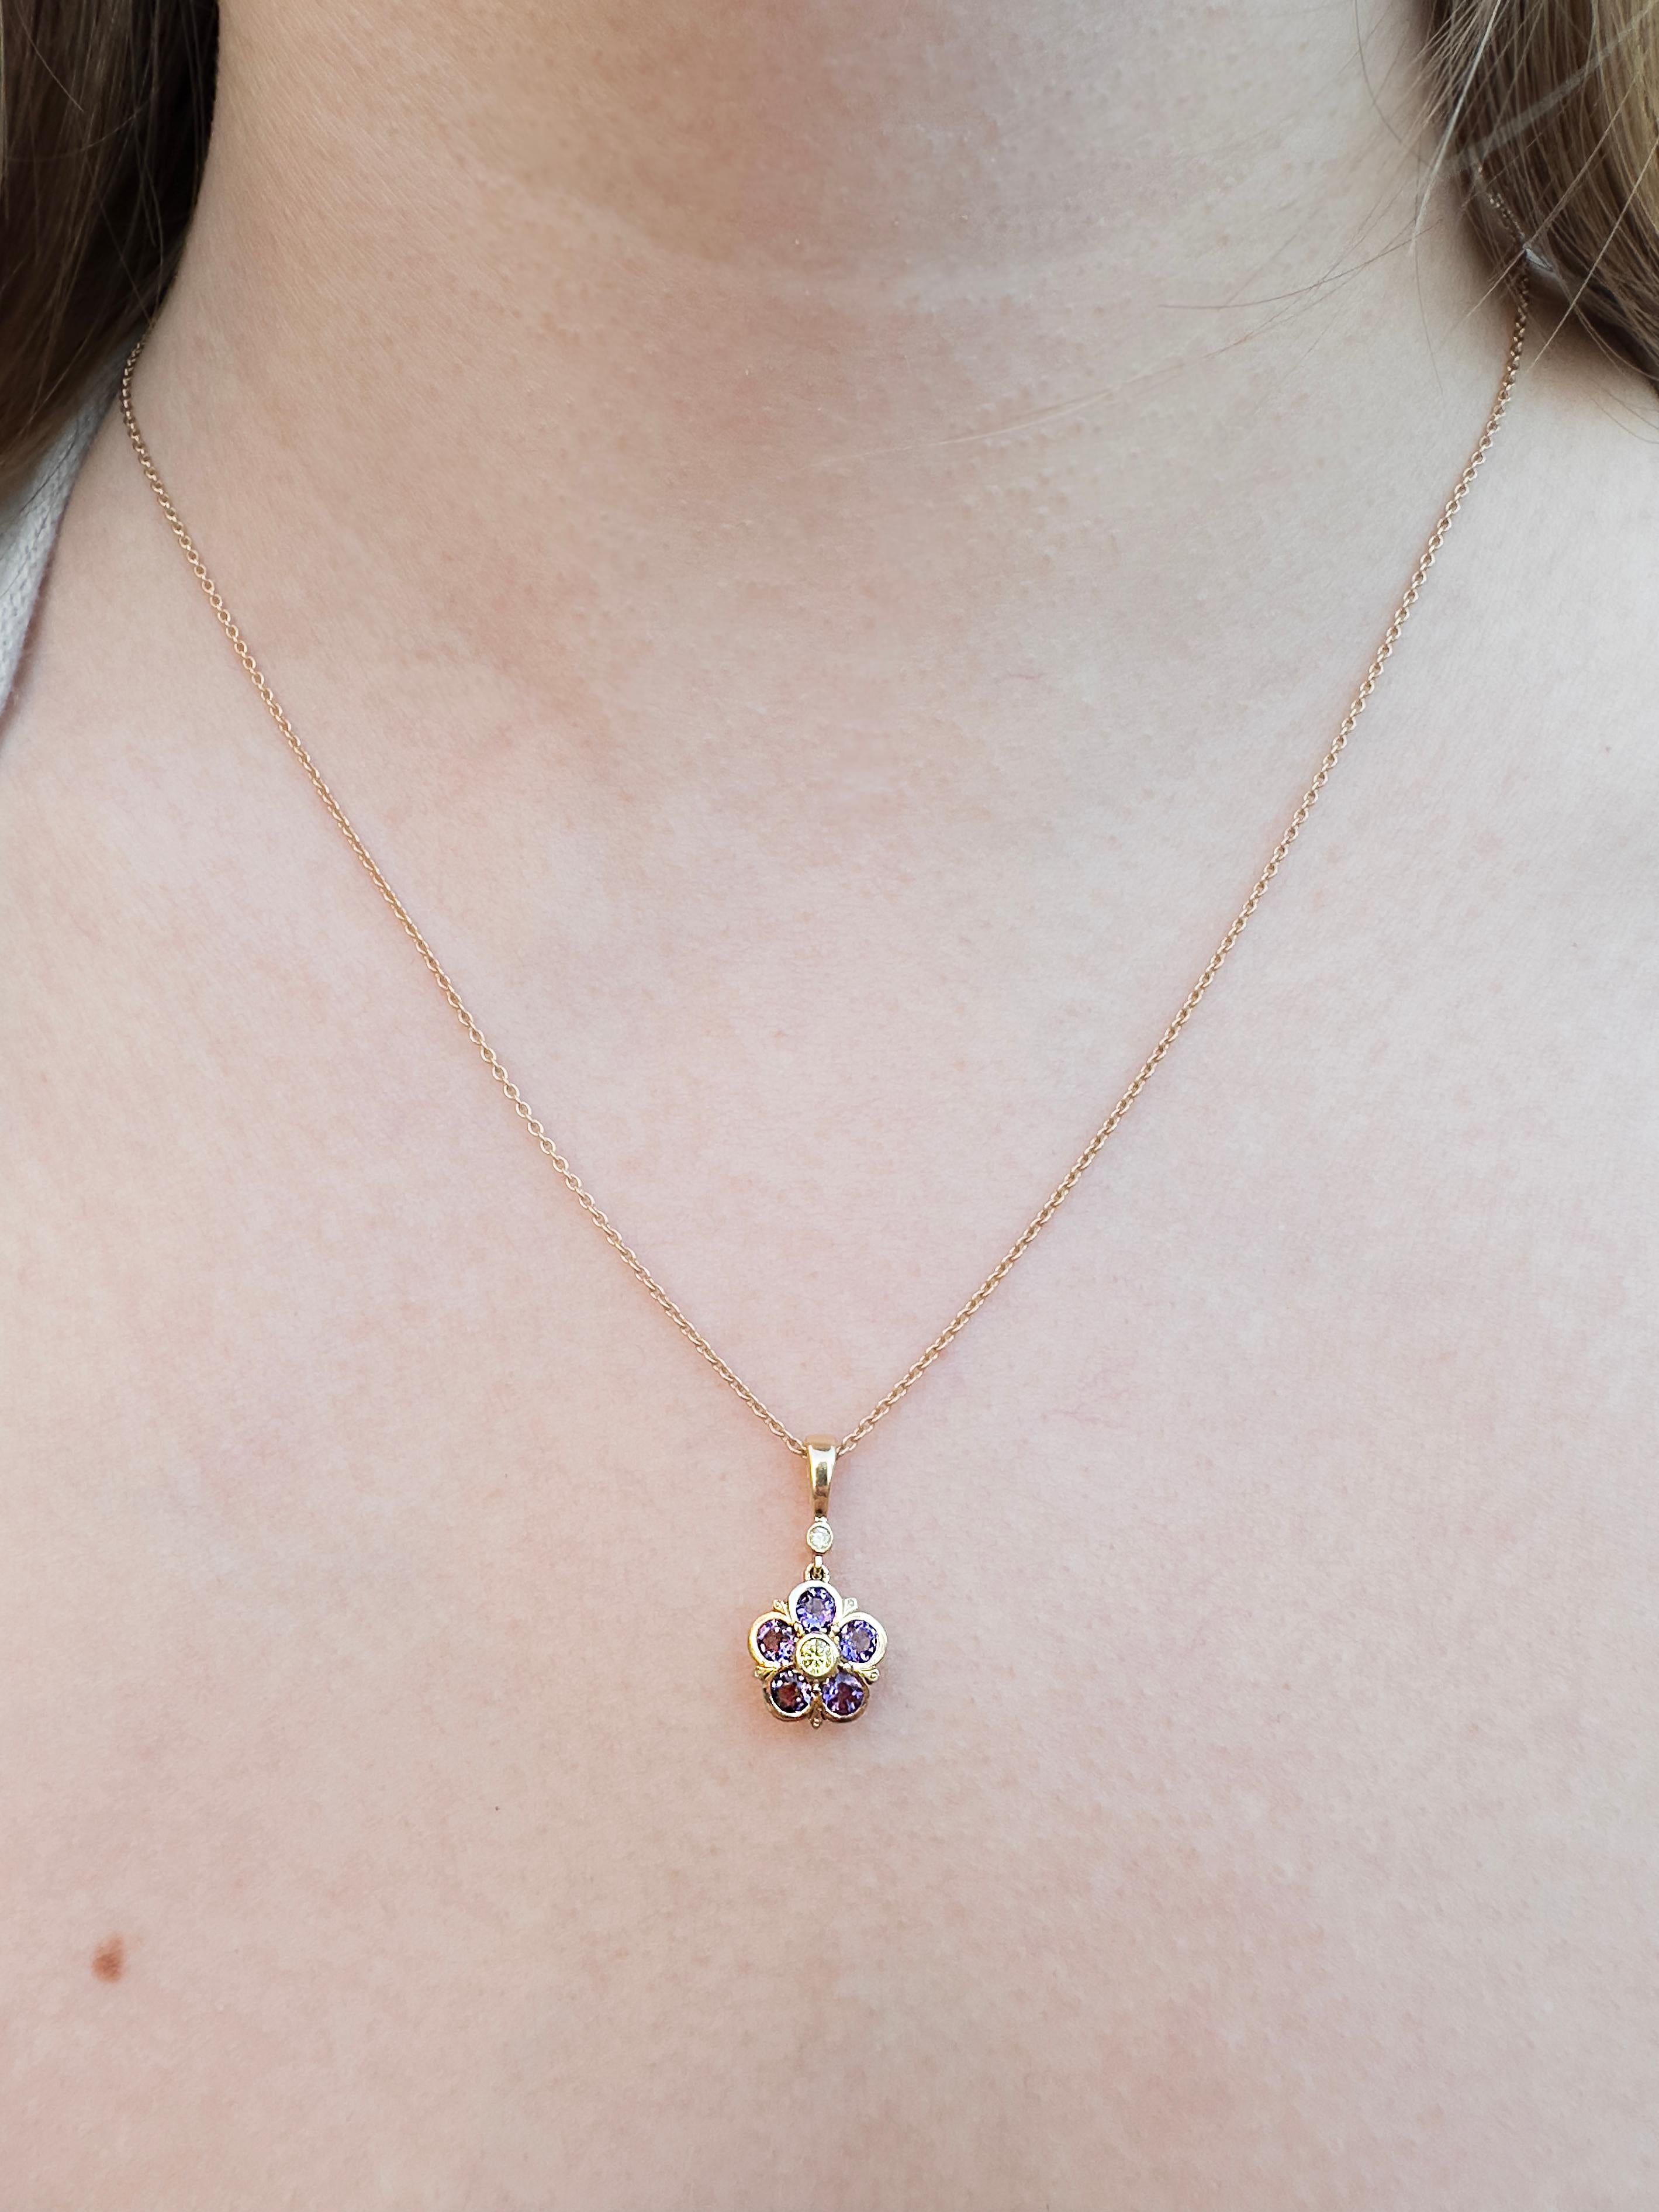 Brilliant Cut Amethyst and Yellow Diamond Rose Floral Yellow Gold Pendant Necklace For Sale